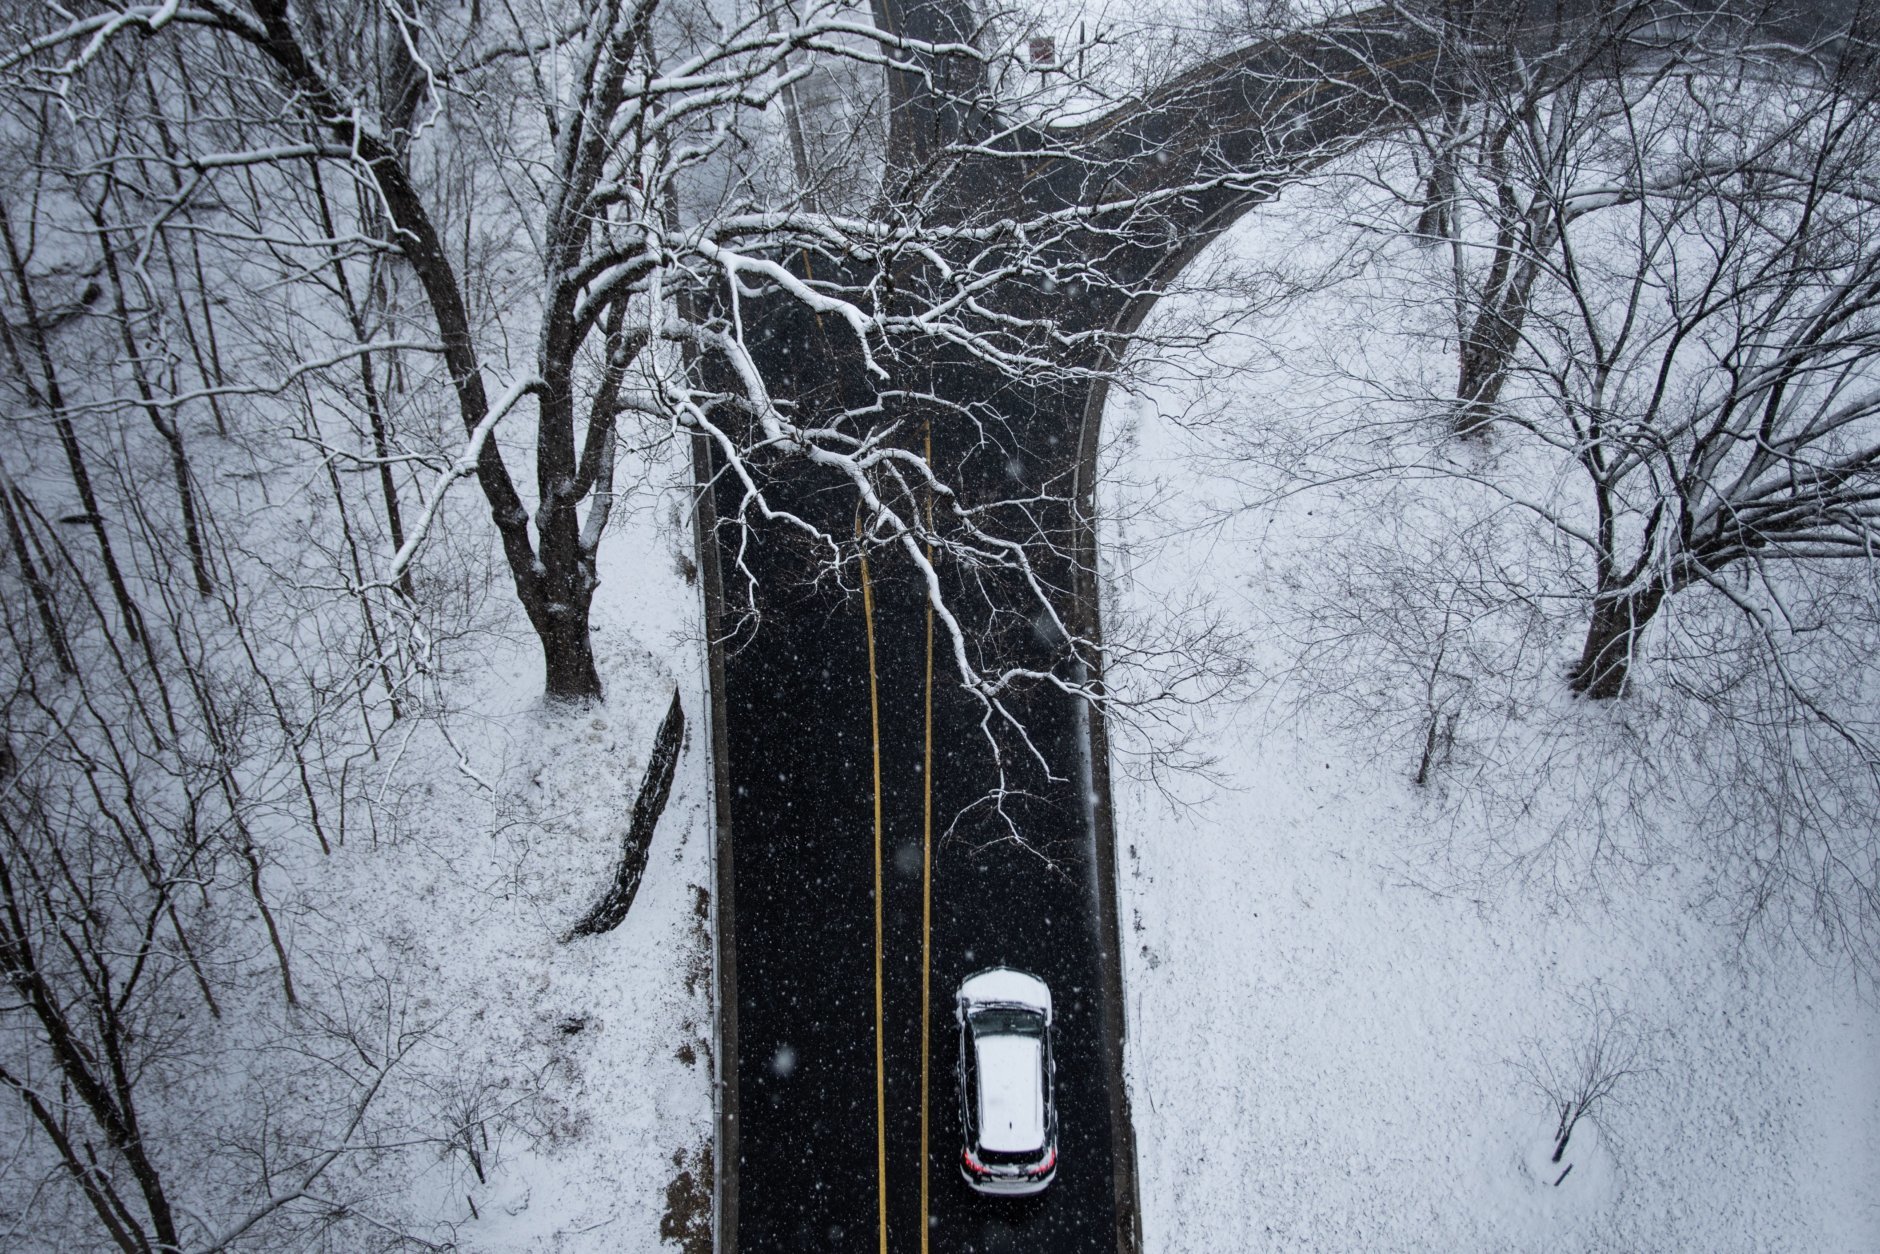 A vehicle passes under snow-covered trees on Beach Drive under the Connecticut Avenue overpass in Woodley Park. Roads on Wednesday morning in northwest D.C. were slushy, but drivable. (WTOP/Alejandro Alvarez)